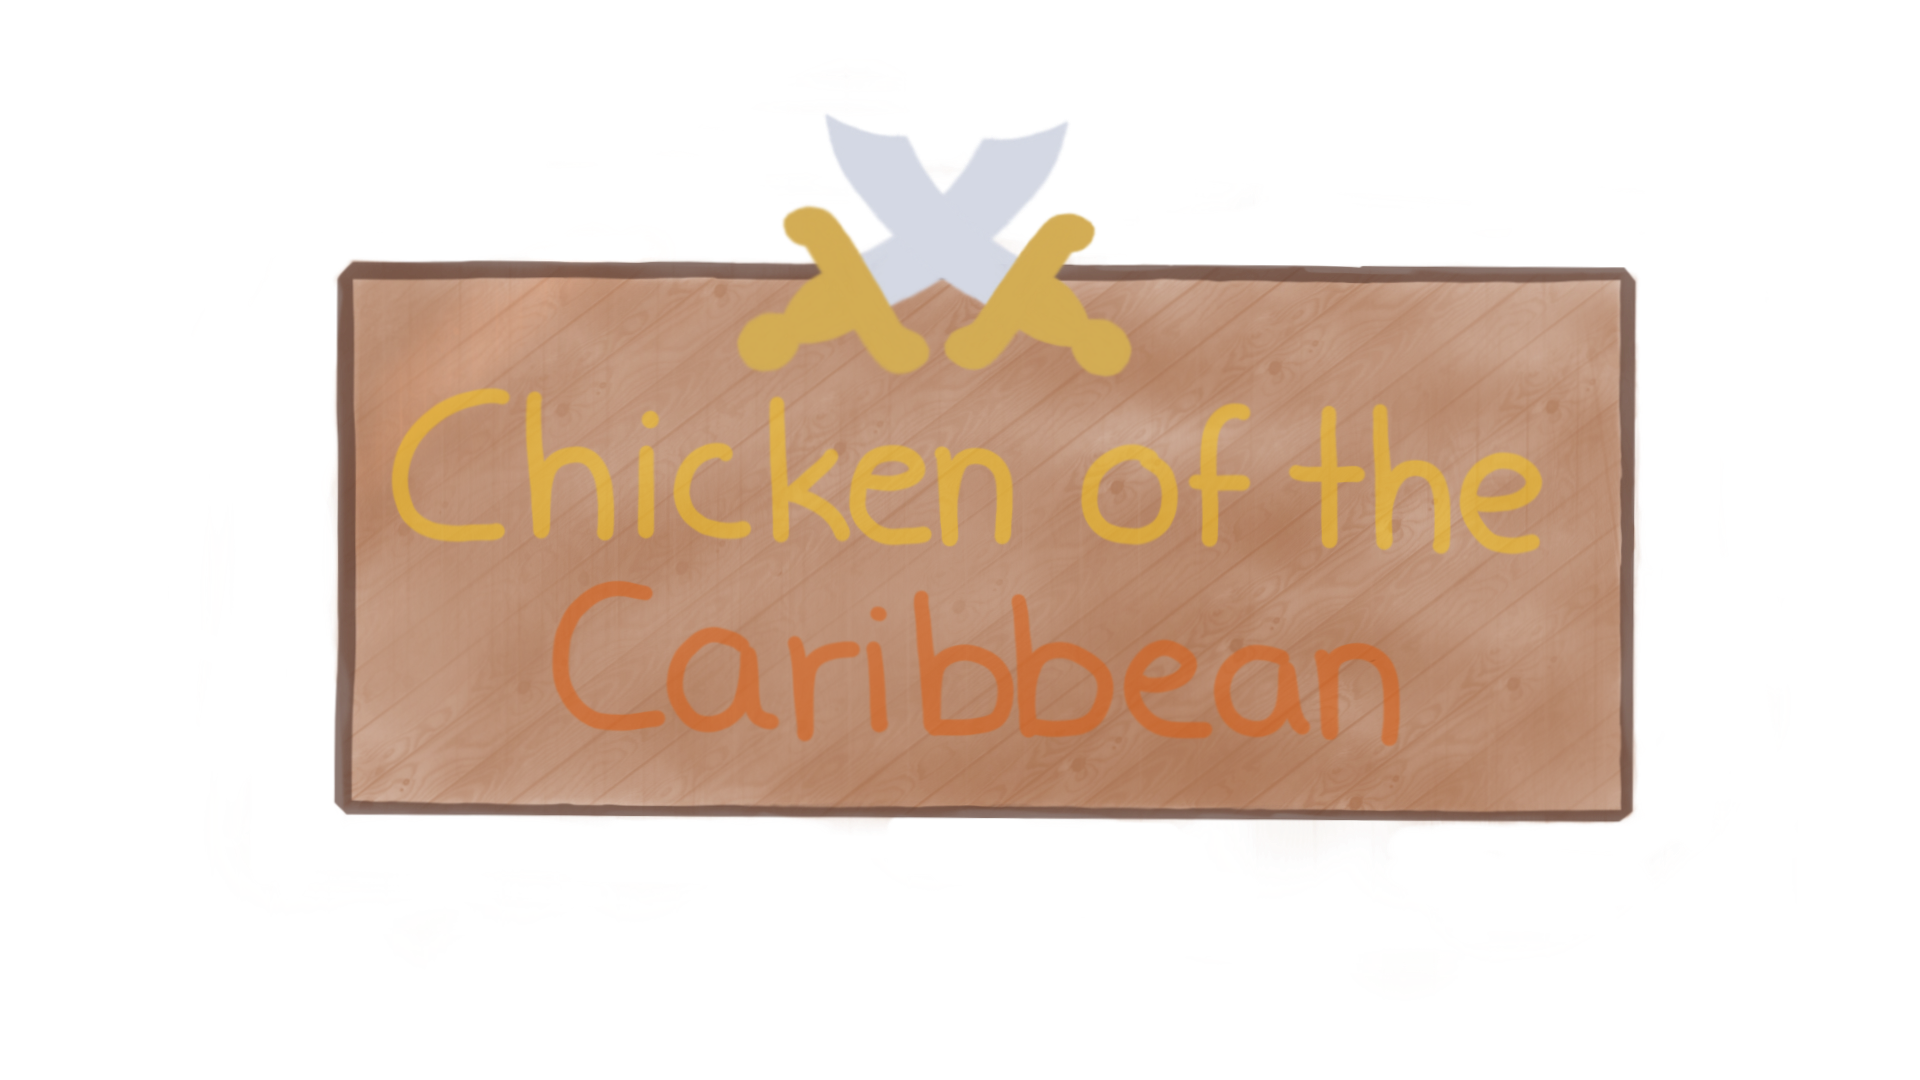 Chicken of the Caribbean